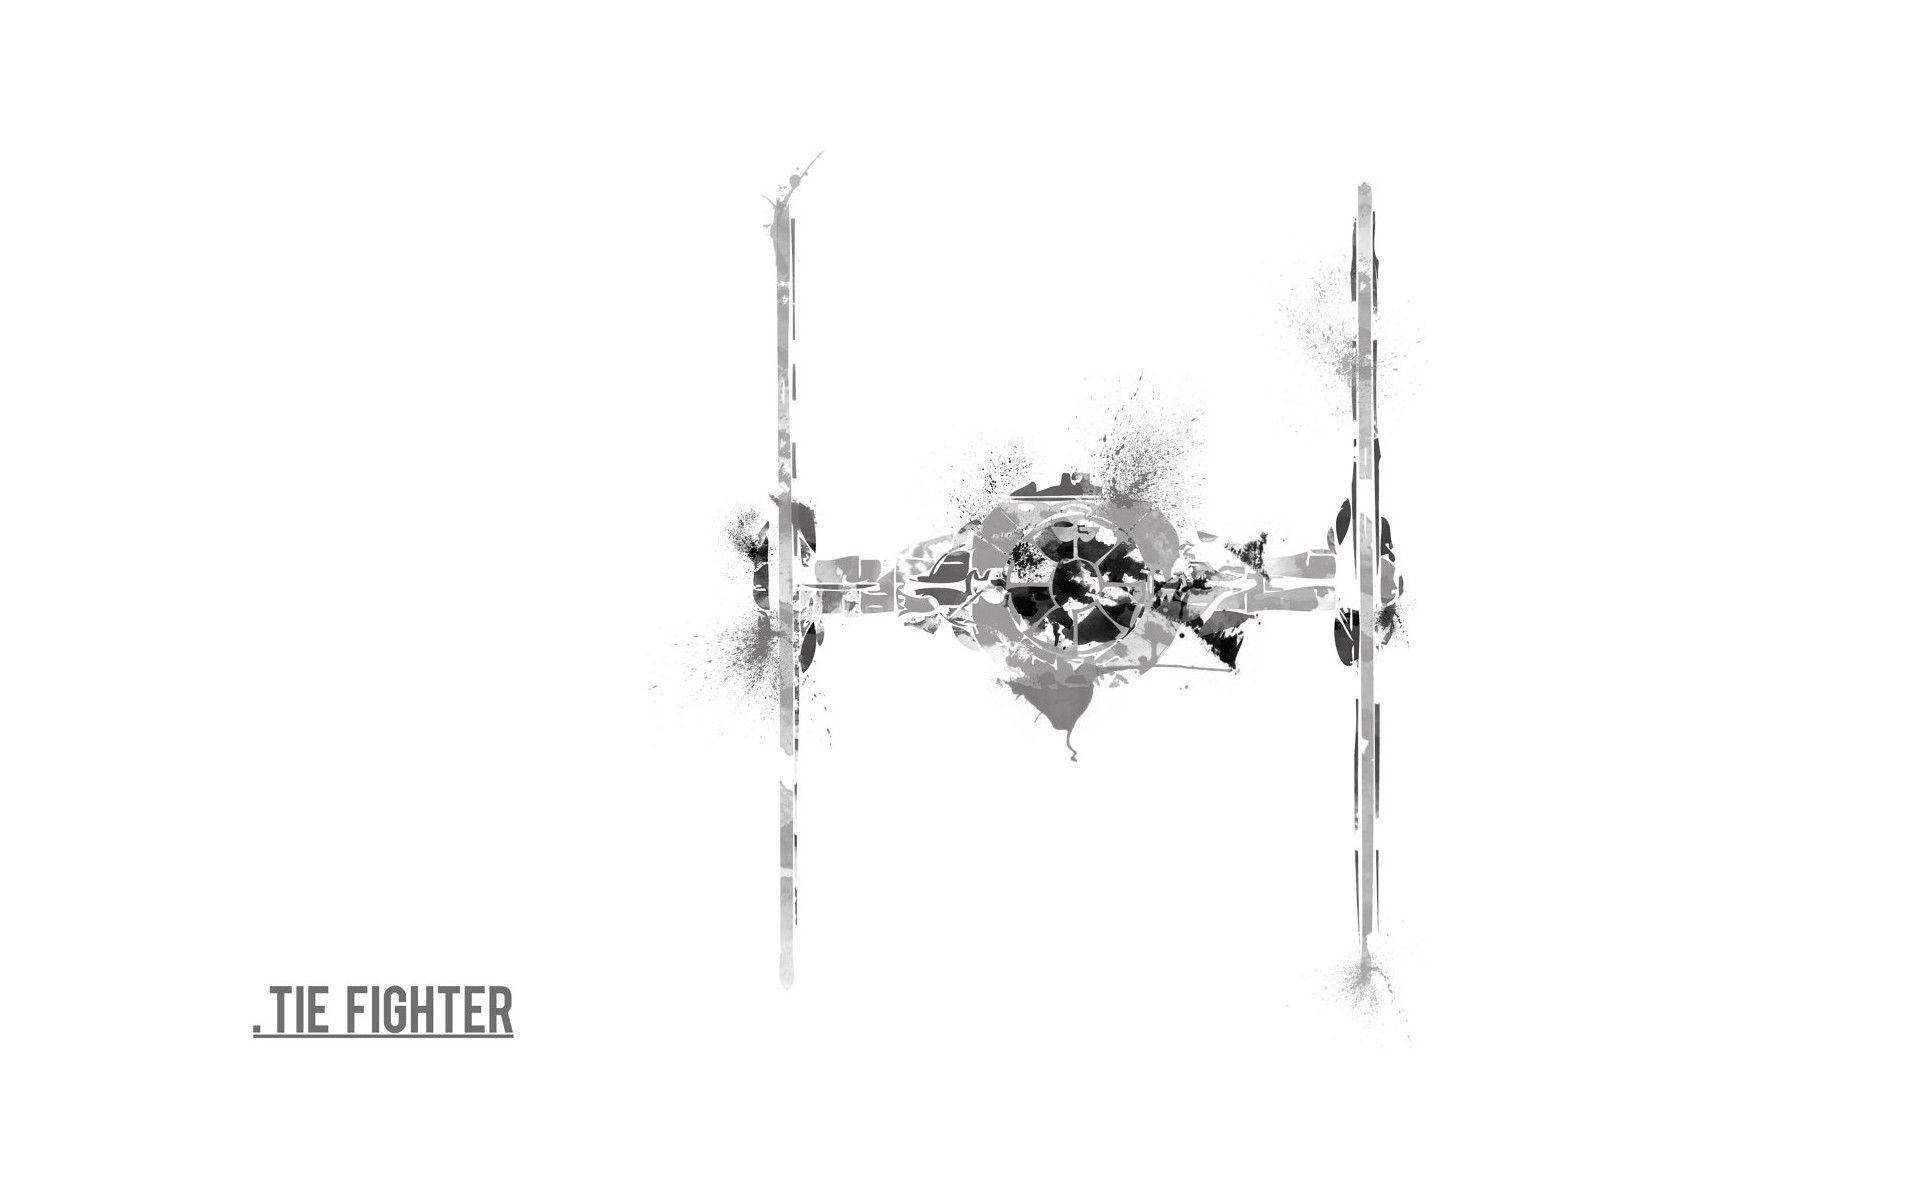 Free Front of Tie Fighter Wallpaper, Free Front of Tie Fighter HD